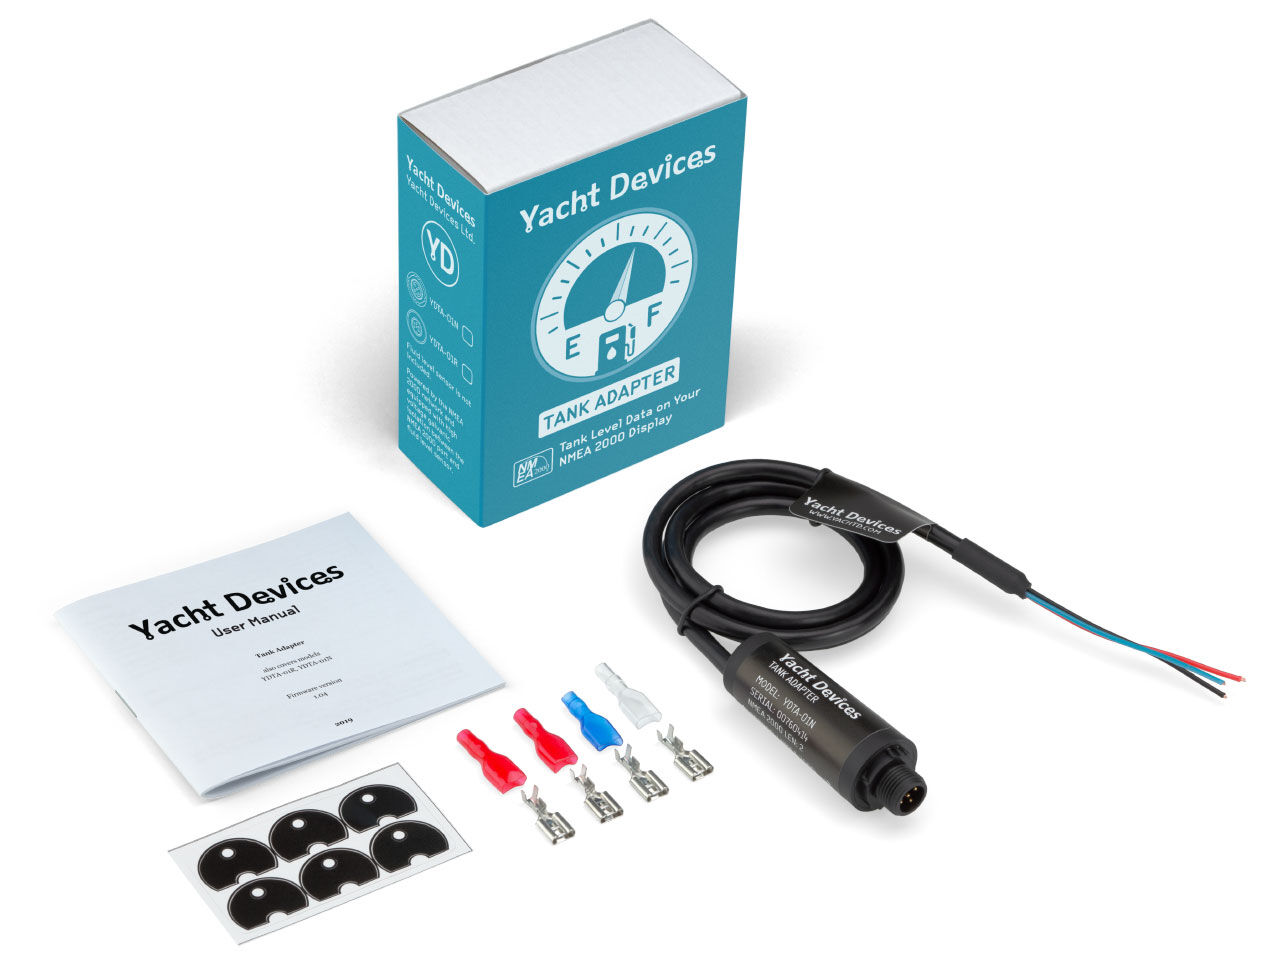 Yacht Devices Digitaler Tankadapter YDTA-01 Pack